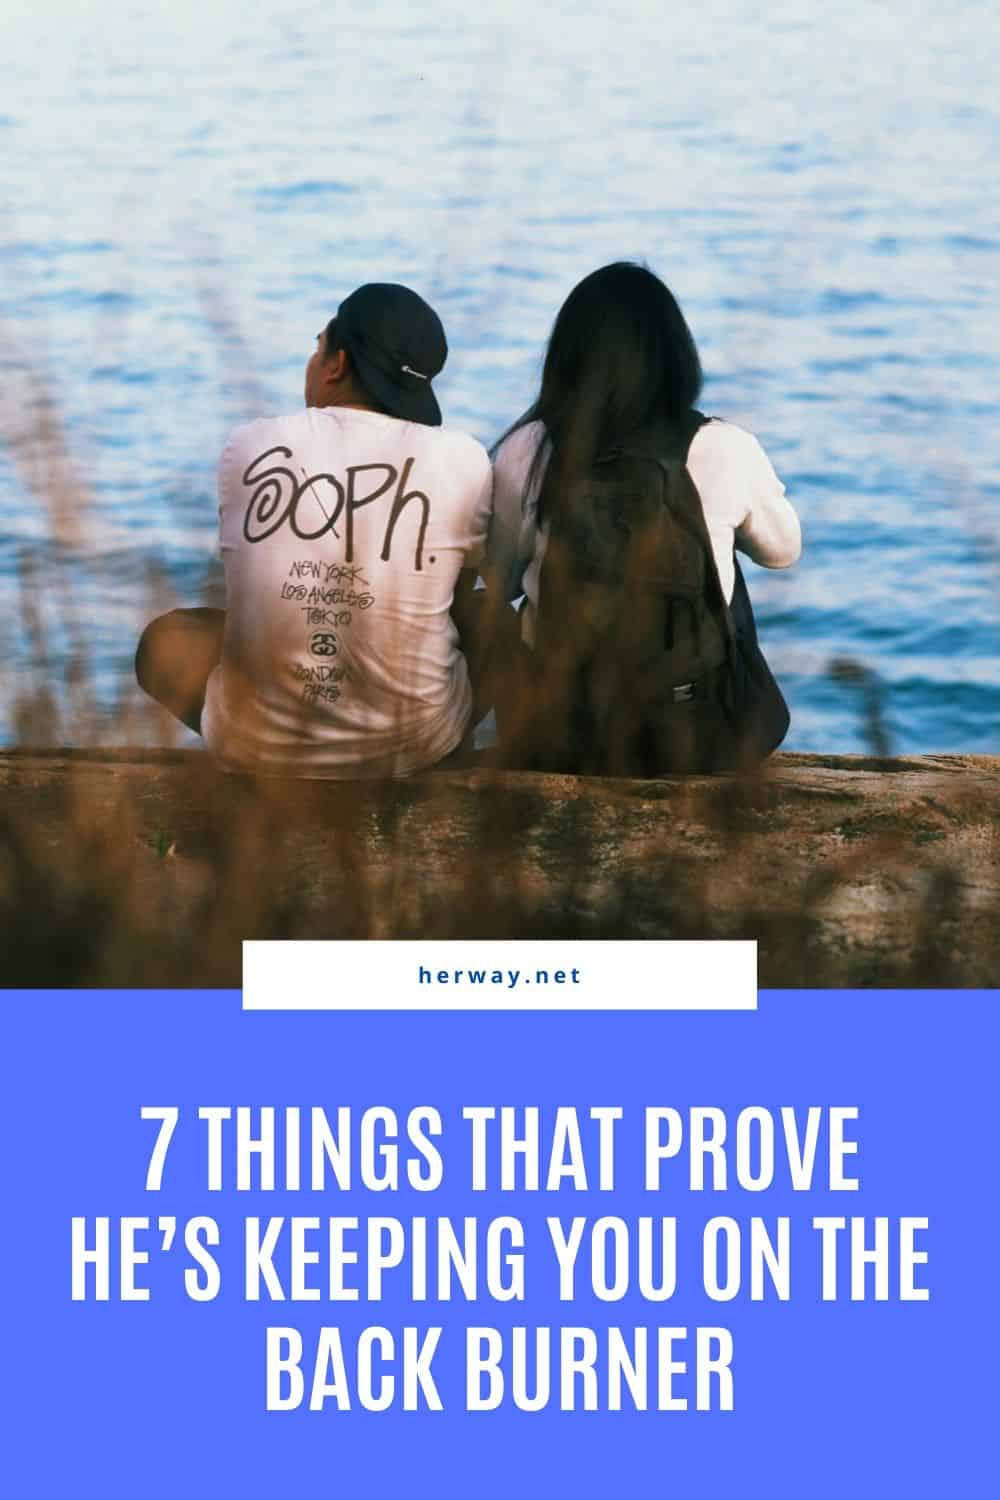 7 Things That Prove He’s Keeping You On The Back Burner